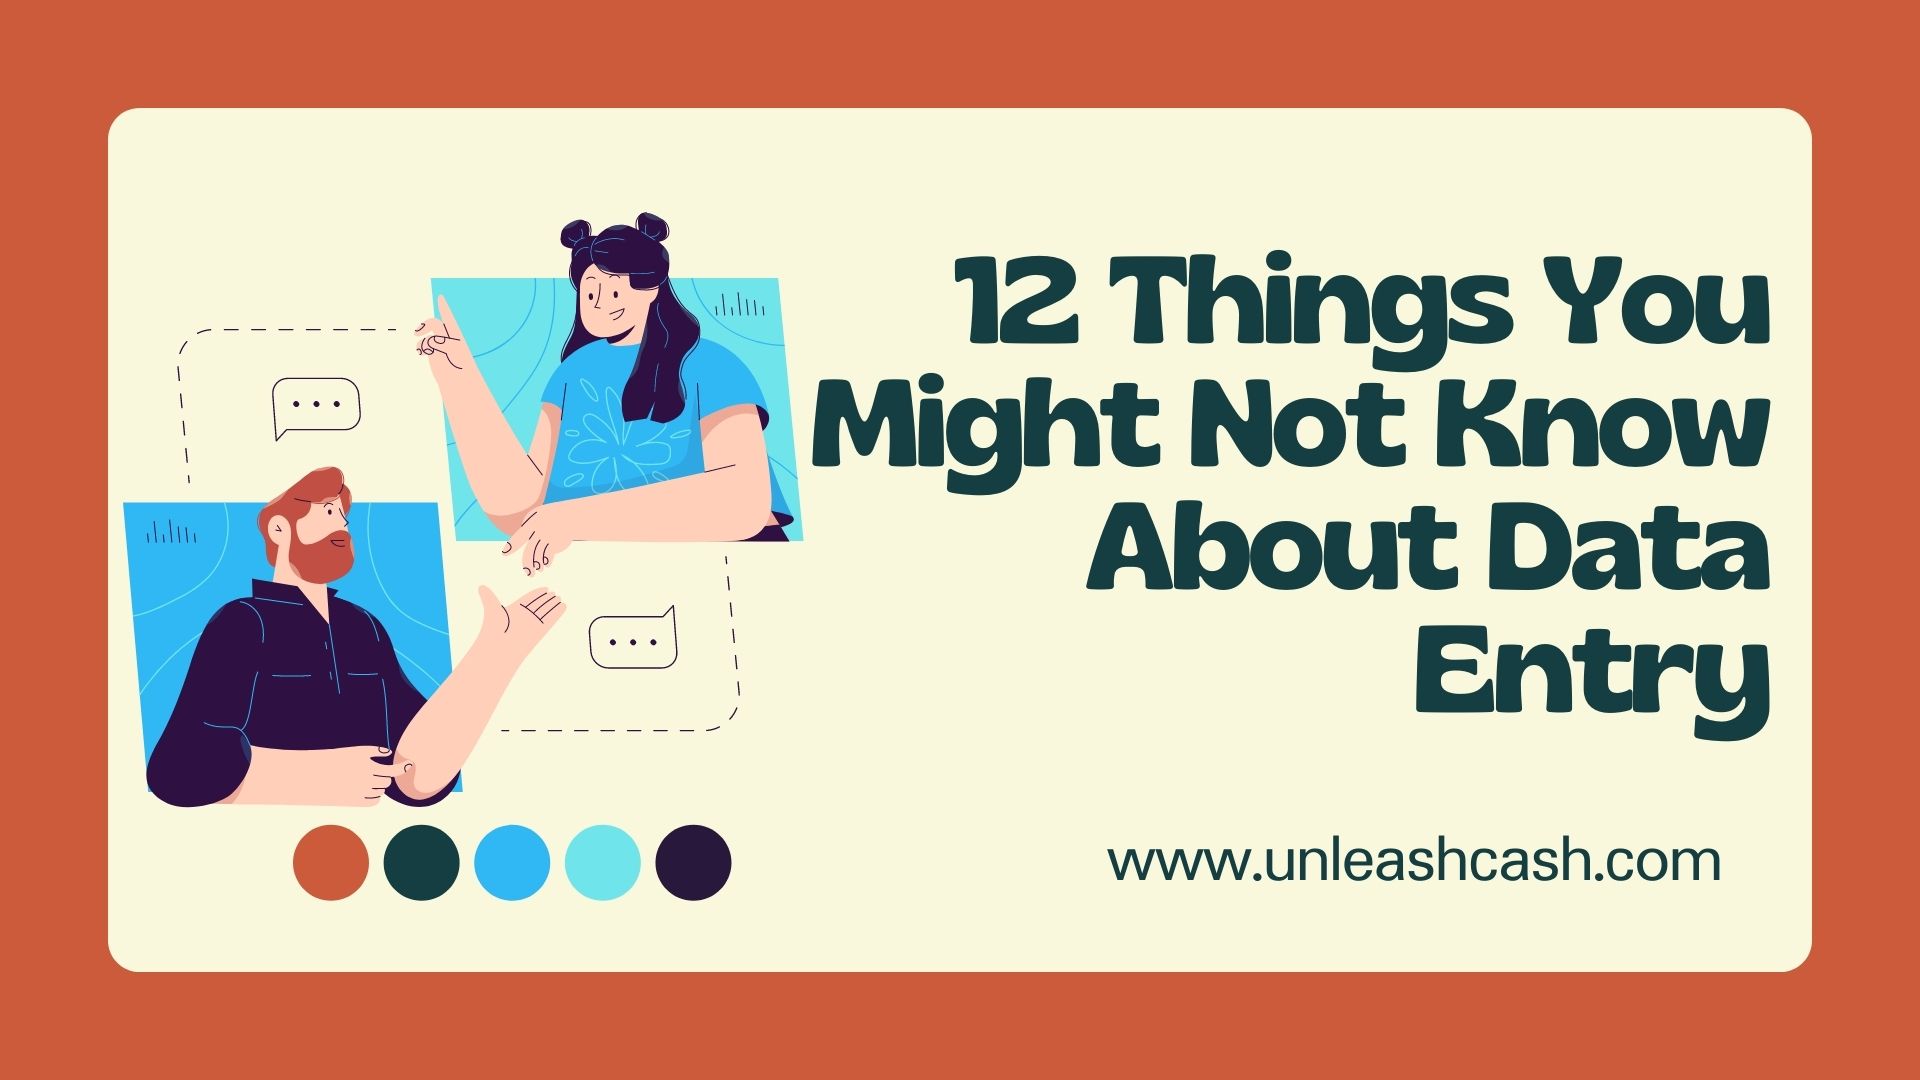 12 Things You Might Not Know About Data Entry